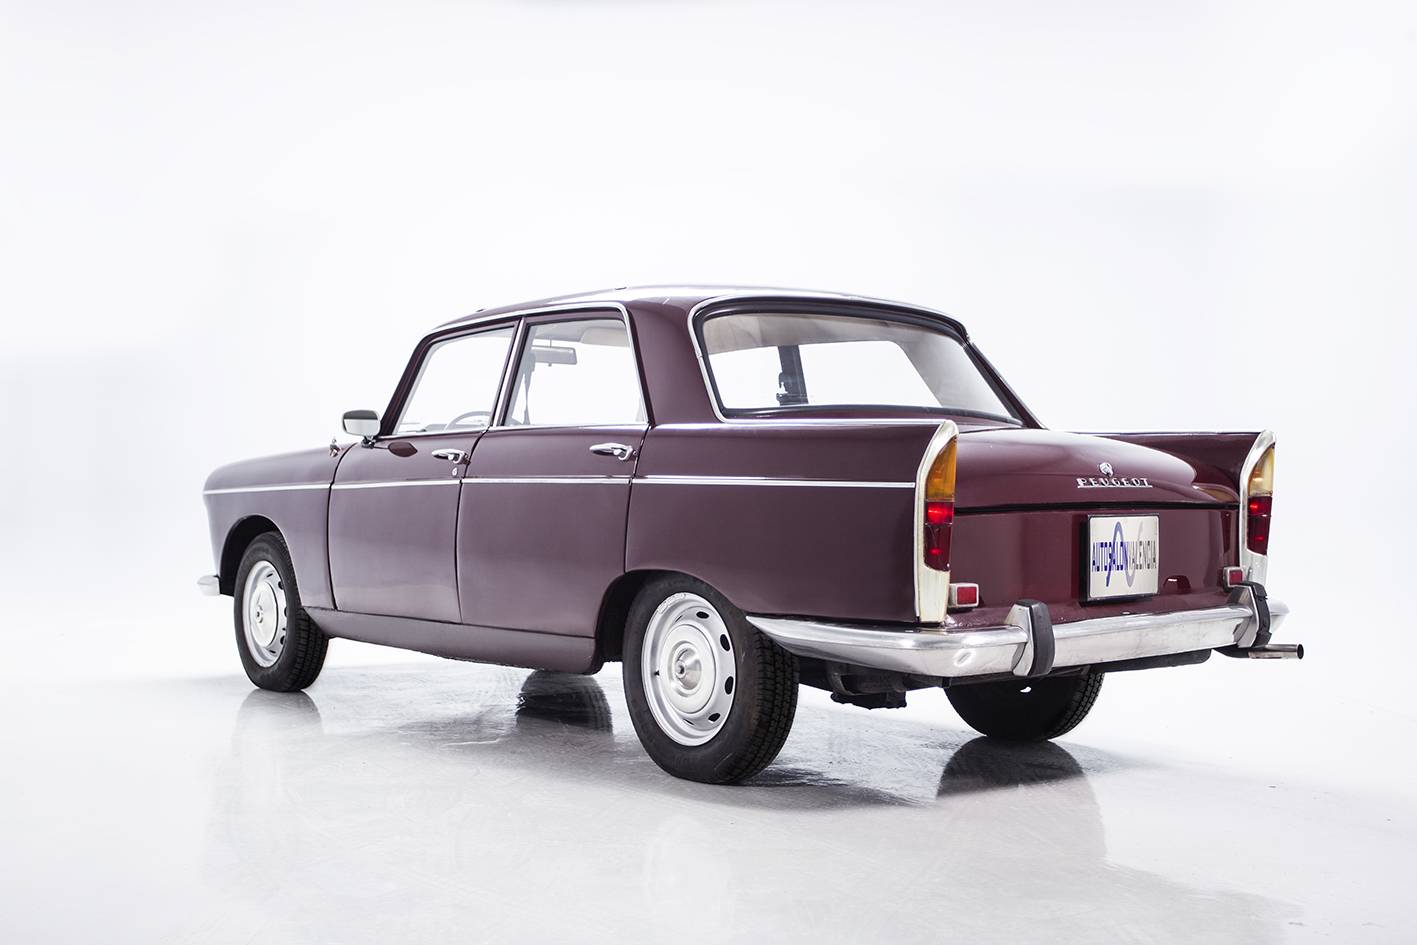 For Sale Peugeot 404 (1969) offered for AUD 11,230